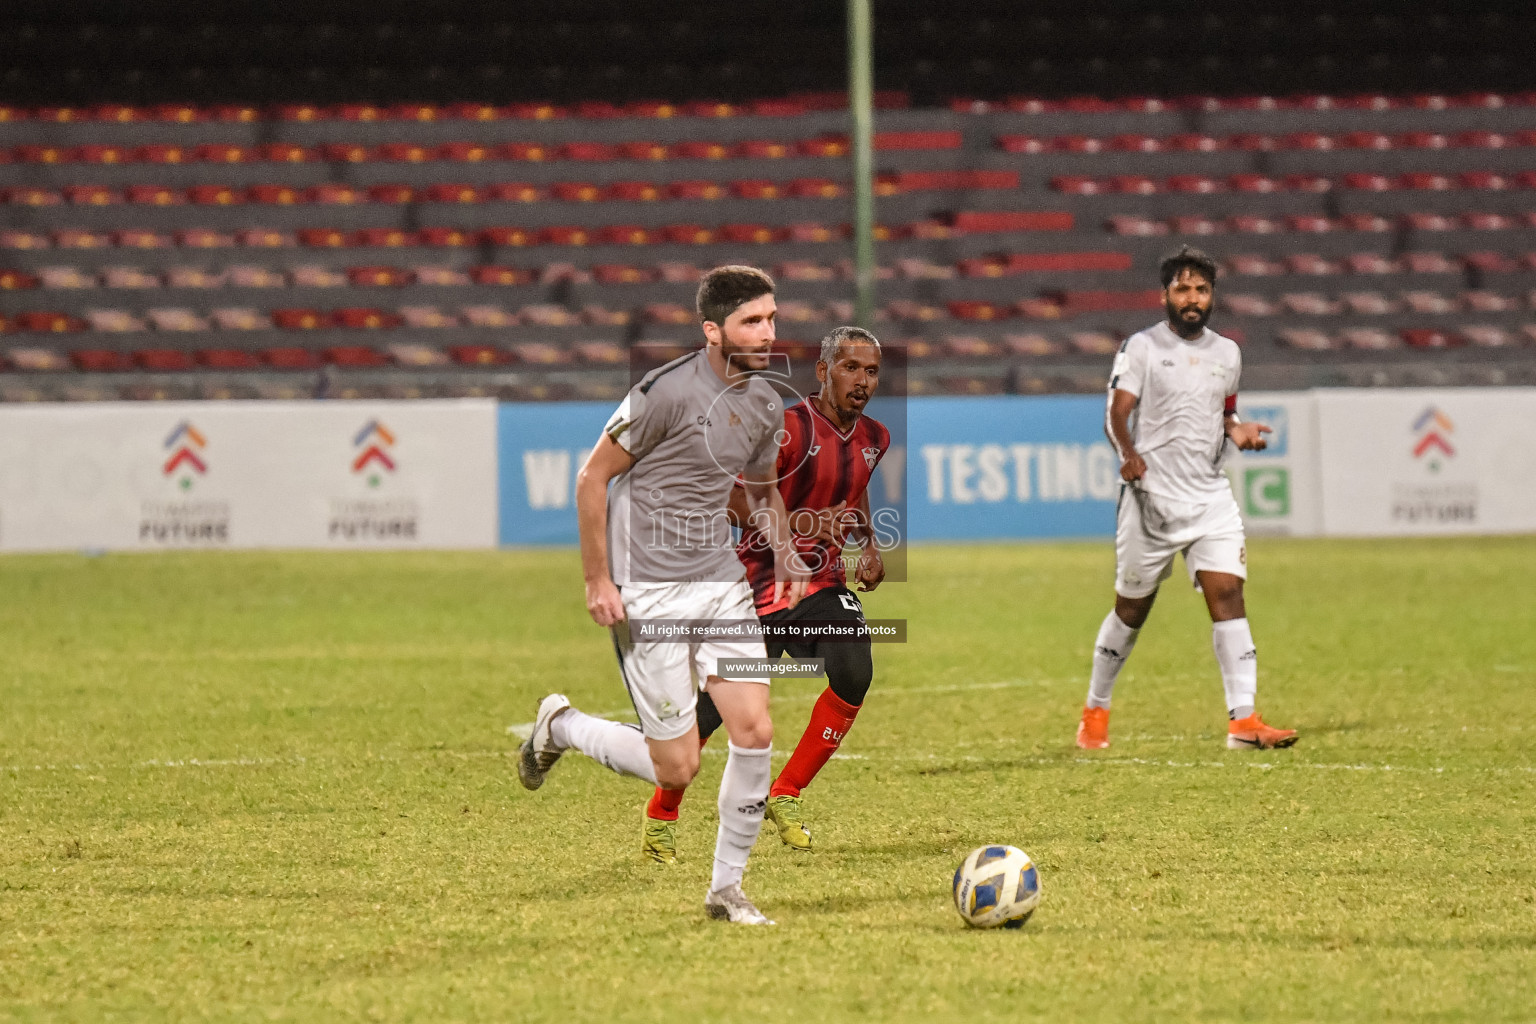 Club Green Streets vs TC Sports Club in the President's Cup 2021/2022 held in Male', Maldives on 08 Jan2022 Photos by Nausham Waheed